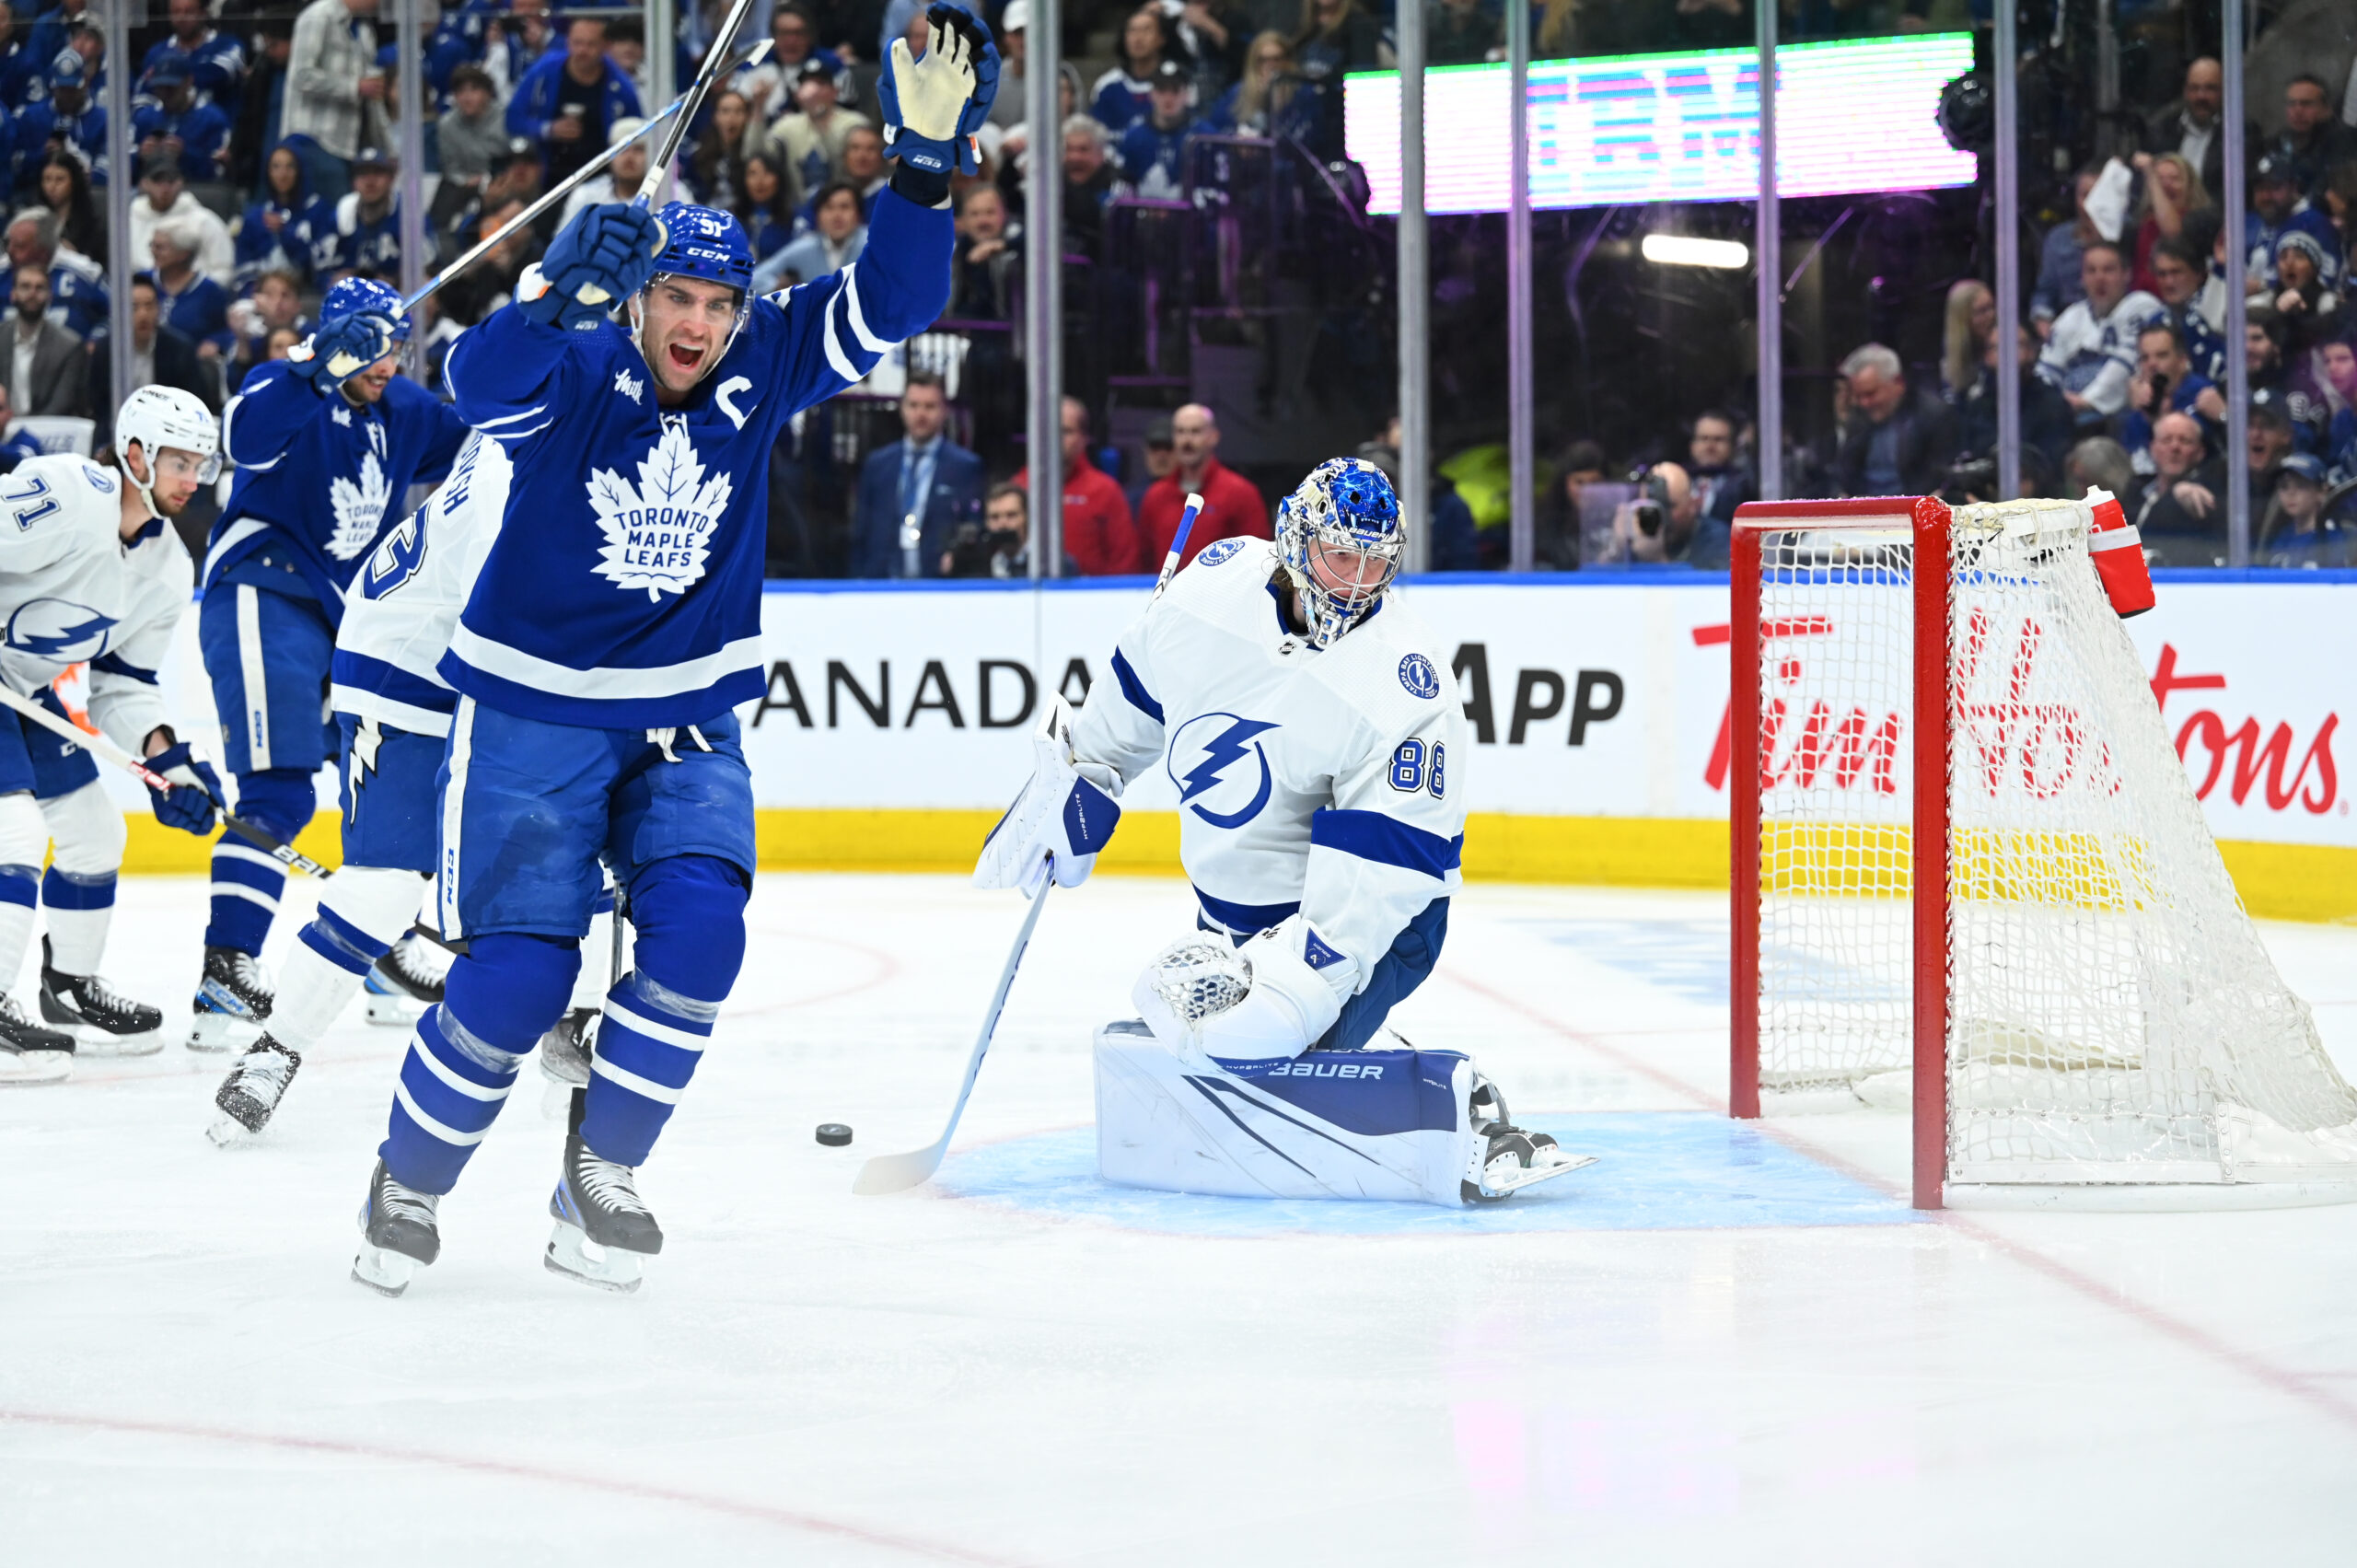 NHL playoffs: Devils-Rangers, Bolts-Leafs highlight openers - The